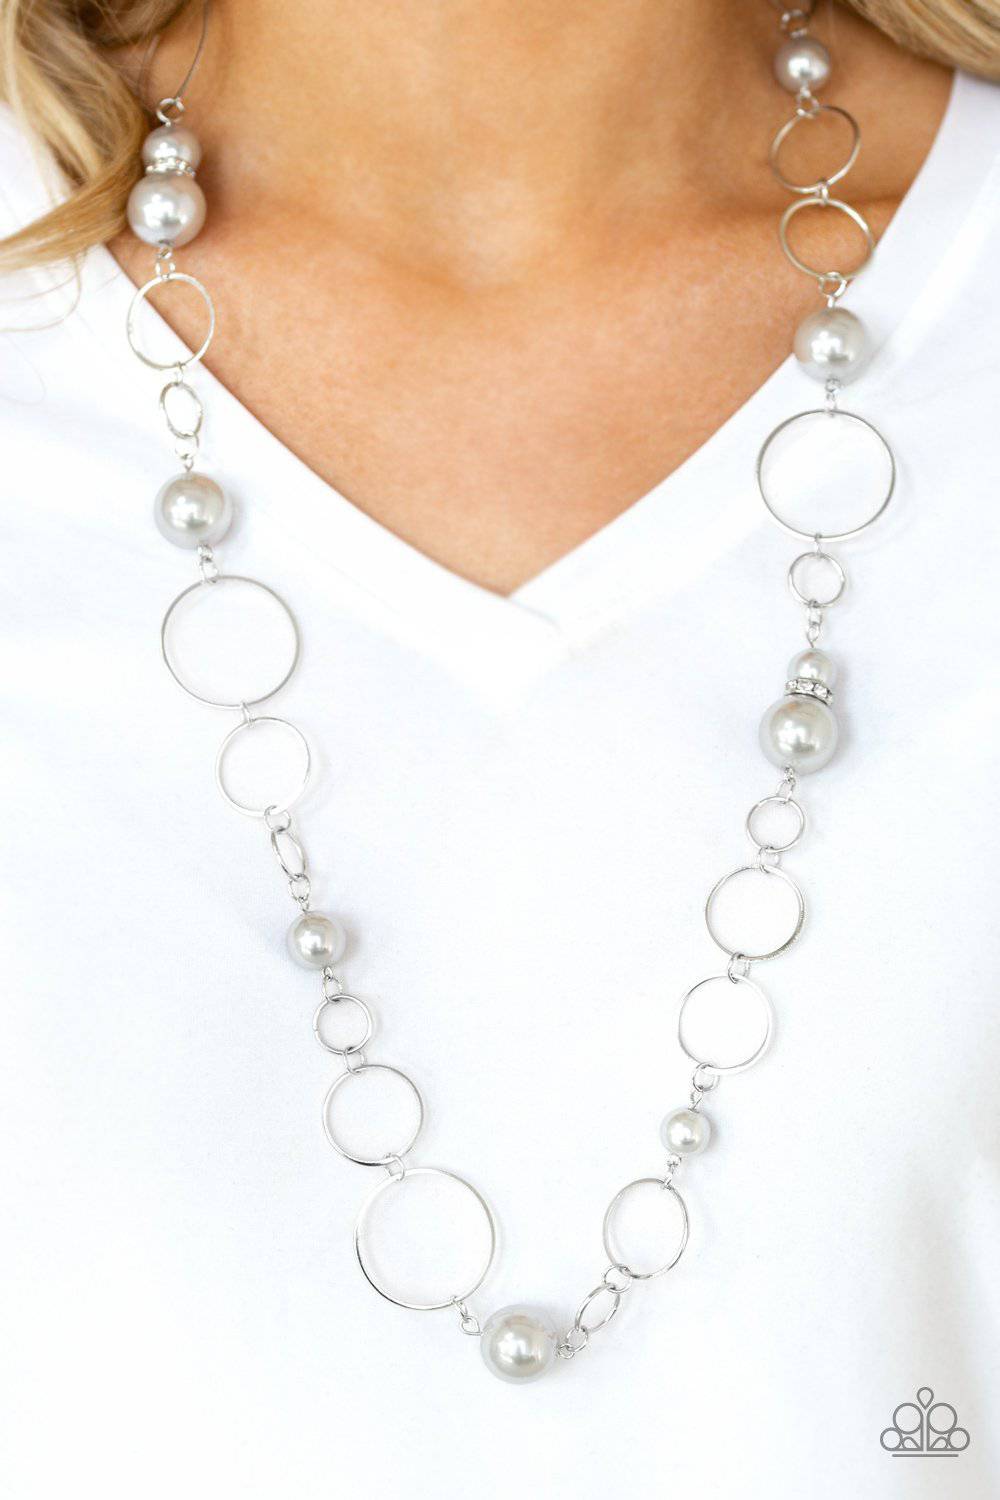 Lovely Lady Luck Silver Necklace - Paparazzi Accessories - GlaMarous Titi Jewels